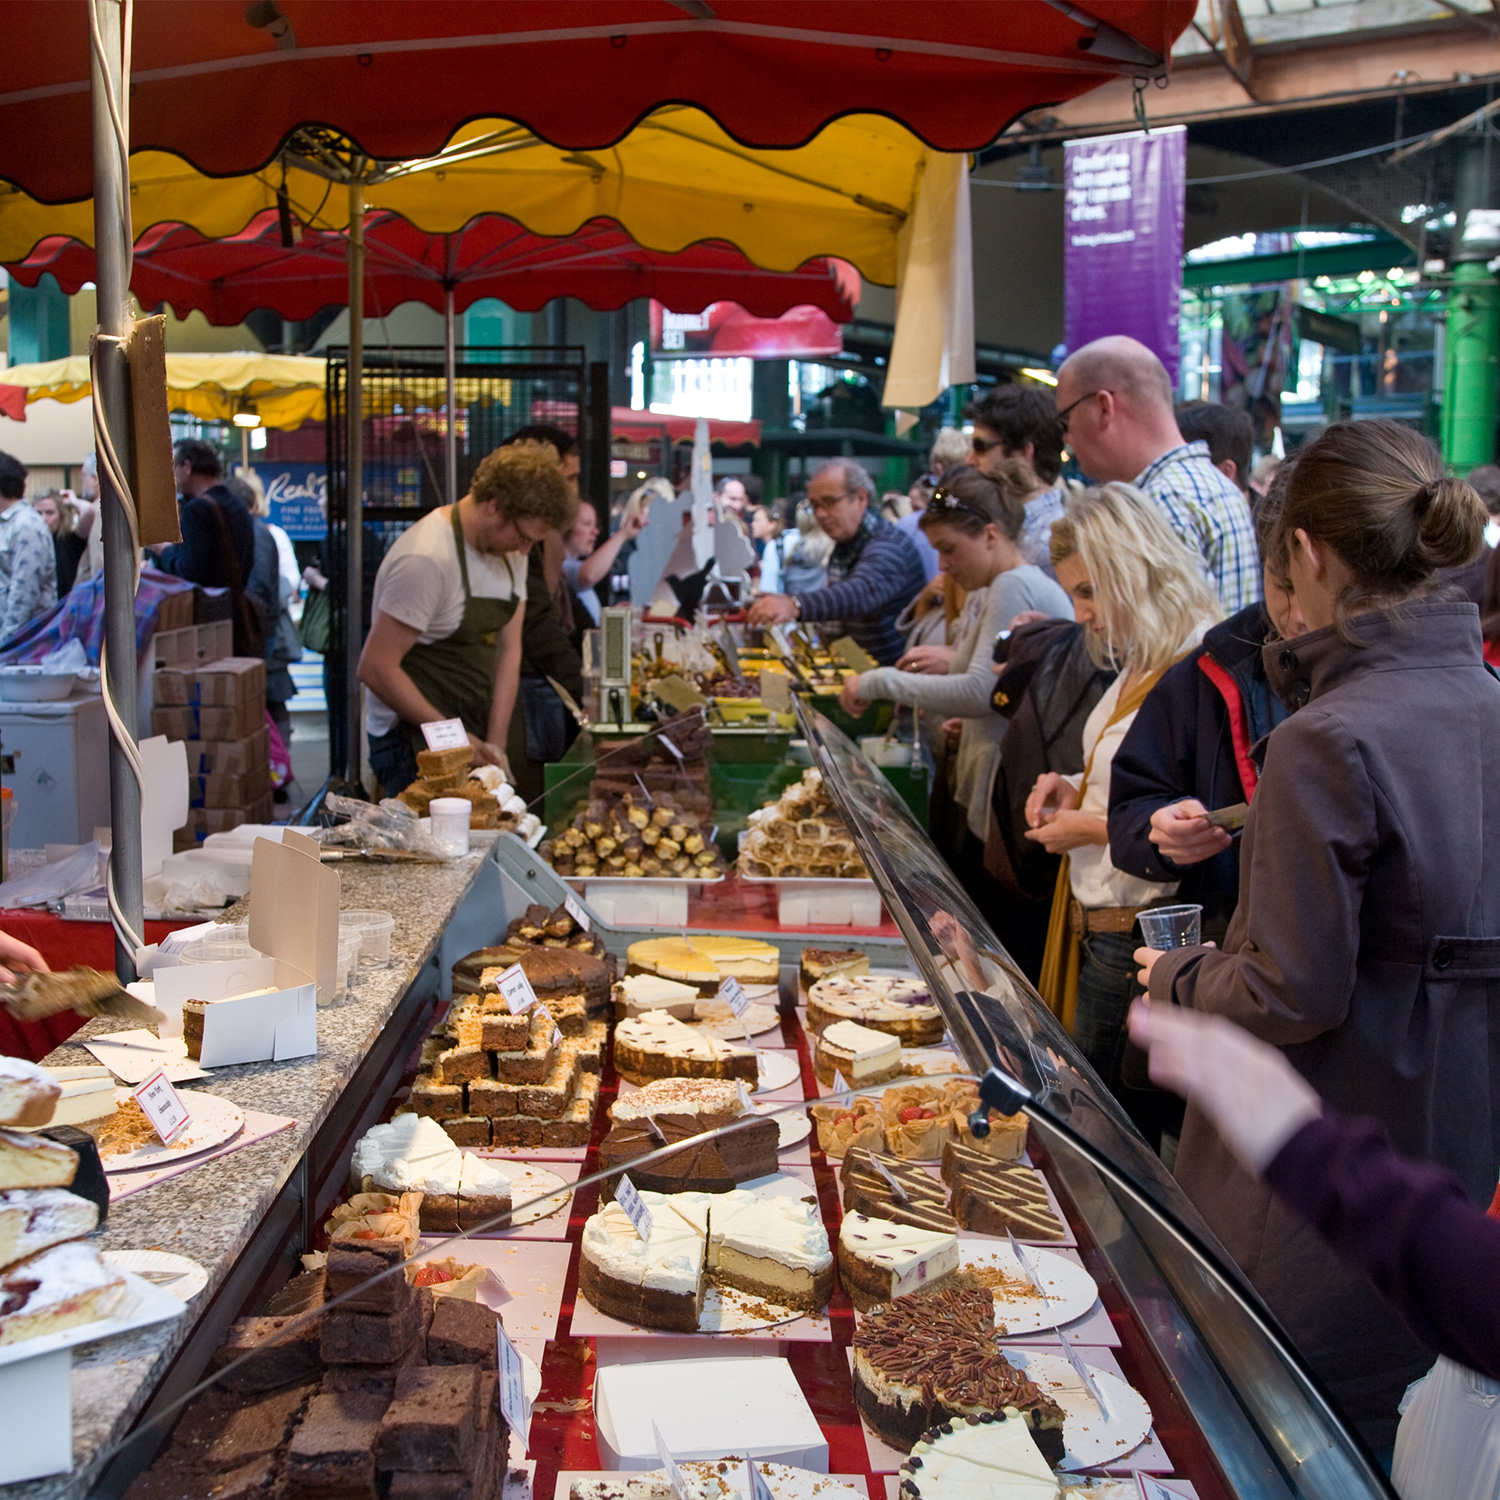 Eat. Drink. Repeat at these food markets